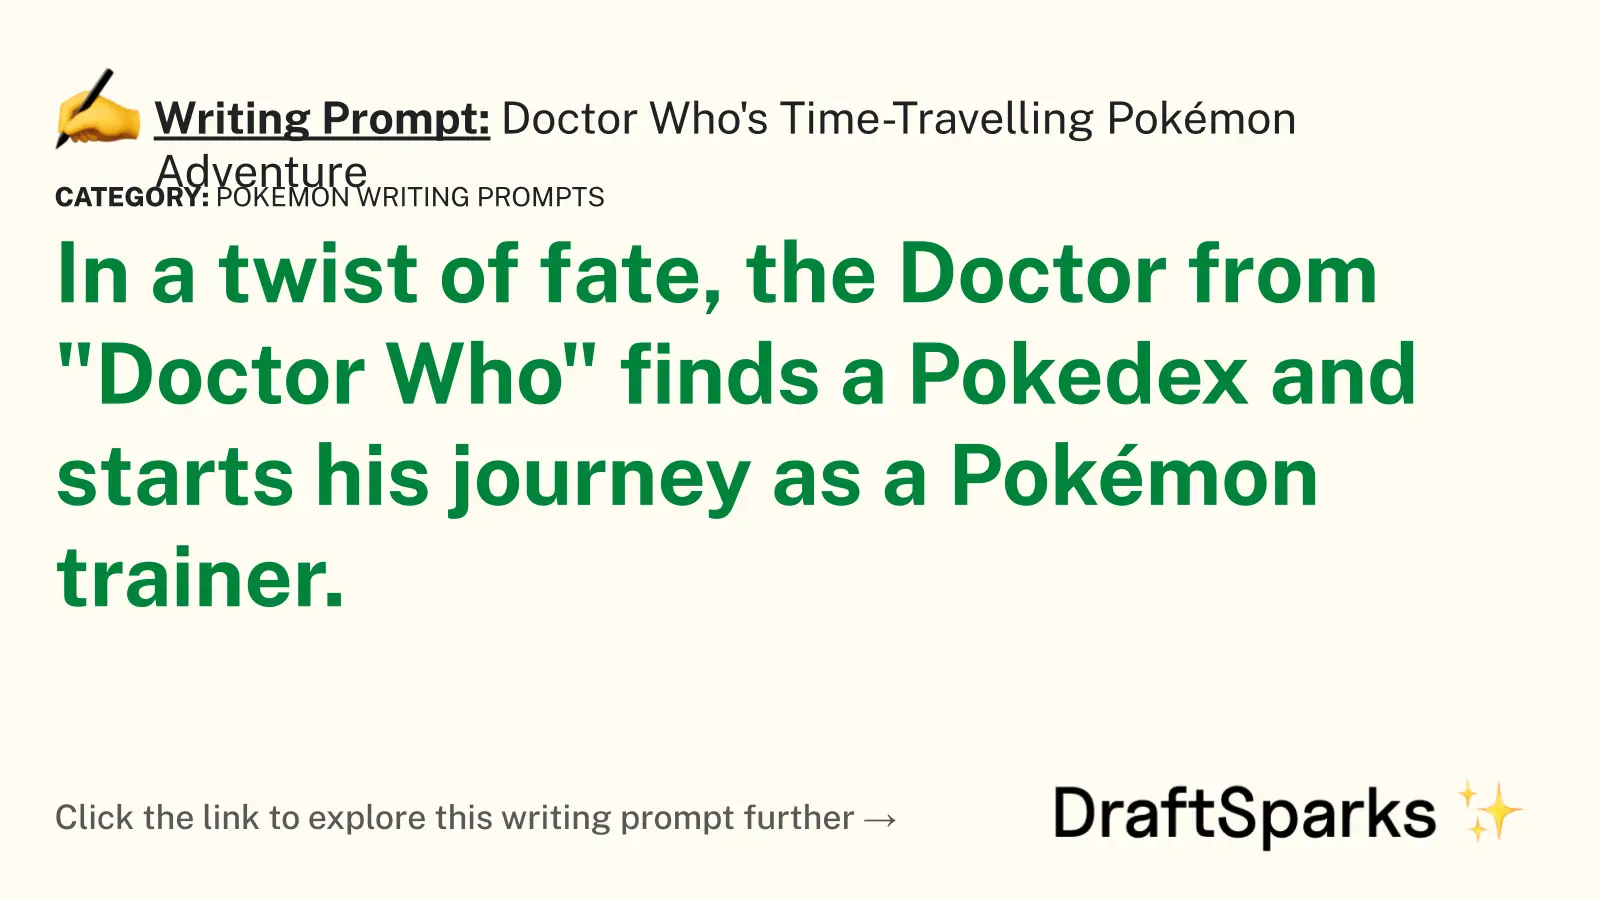 Doctor Who’s Time-Travelling Pokémon Adventure